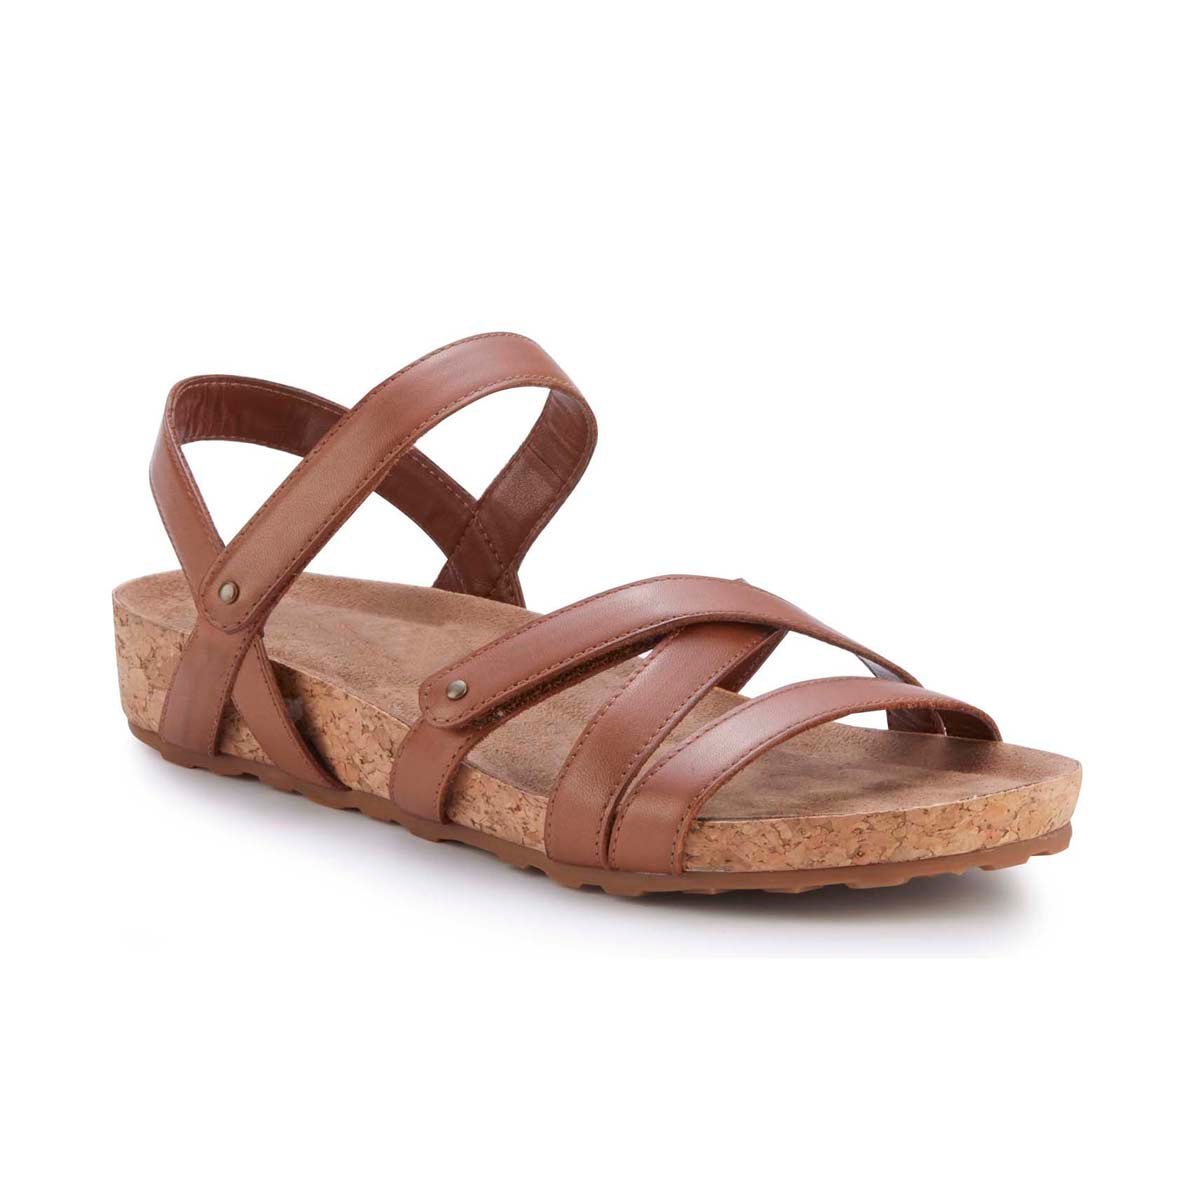 ROS HOMMERSON POOL WOMEN'S ADJUSTABLE STRAPS SANDAL IN LUGGAGE TAN - TLW Shoes